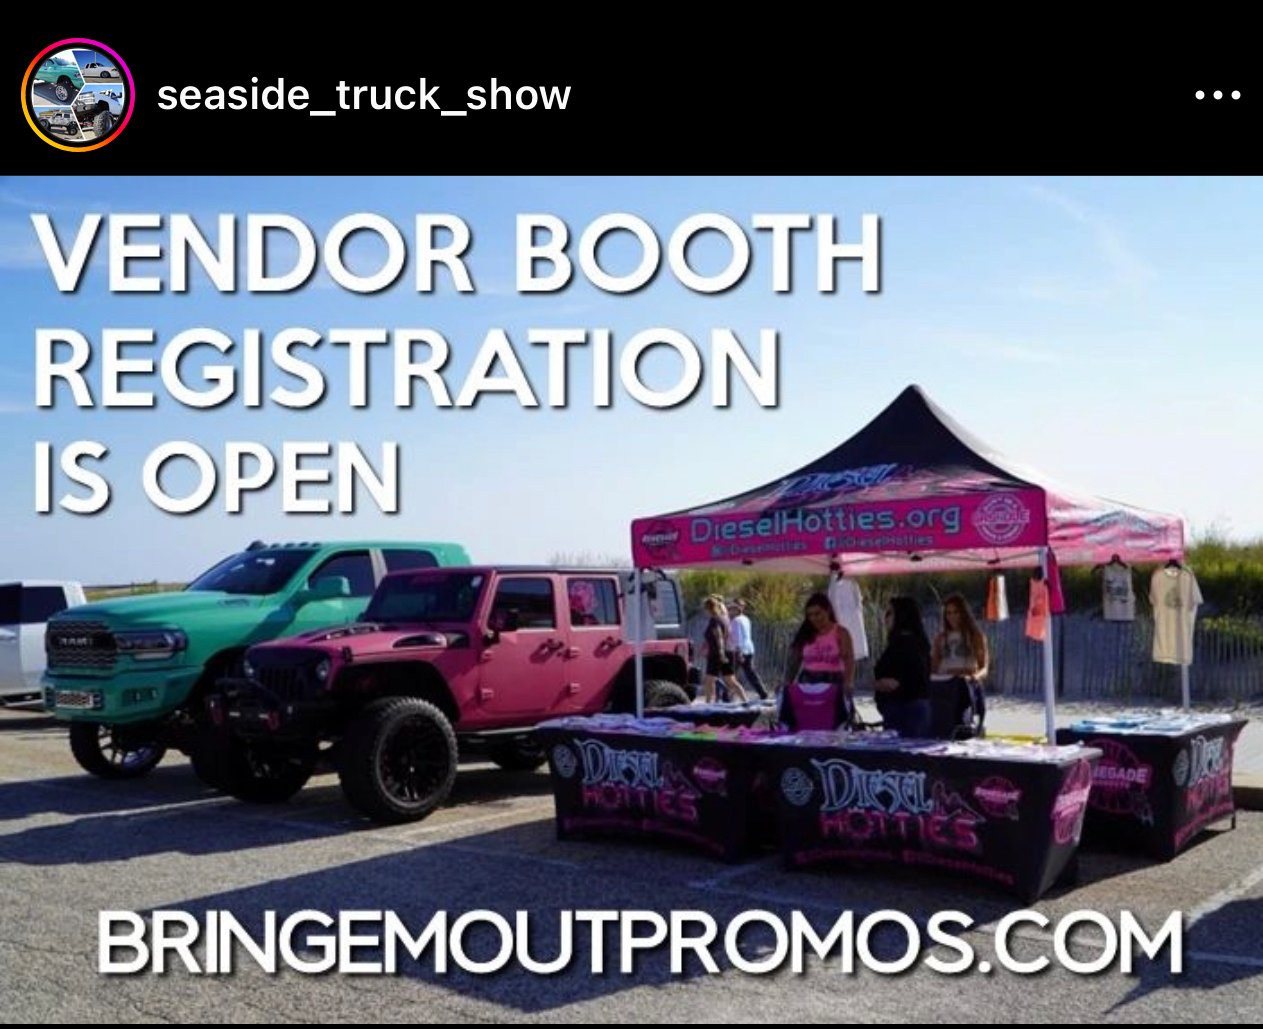 May 6th- Seaside Truck show